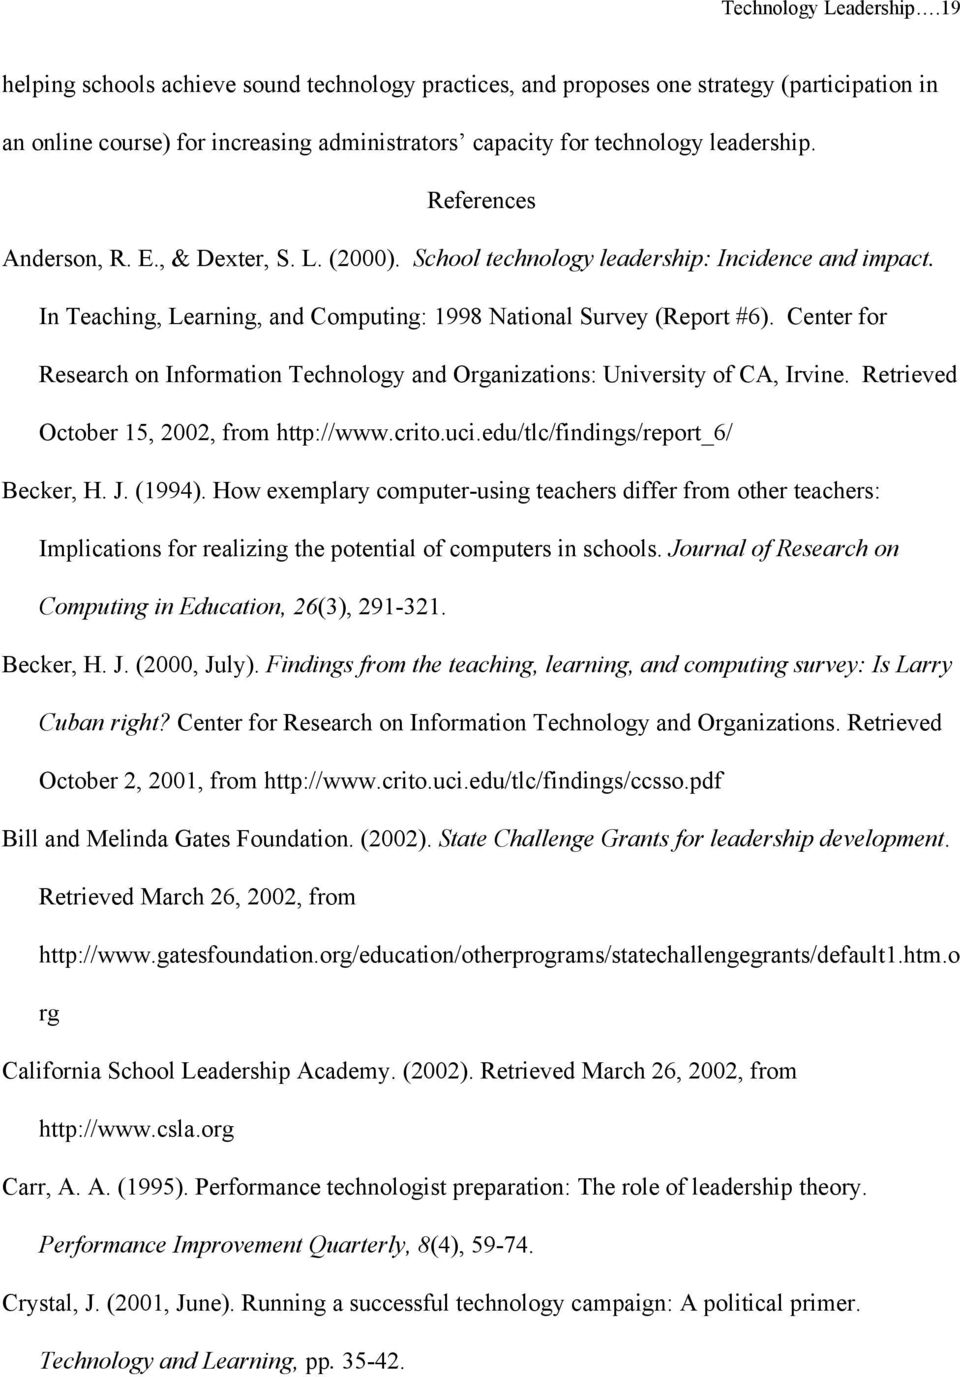 References Anderson, R. E., & Dexter, S. L. (2000). School technology leadership: Incidence and impact. In Teaching, Learning, and Computing: 1998 National Survey (Report #6).